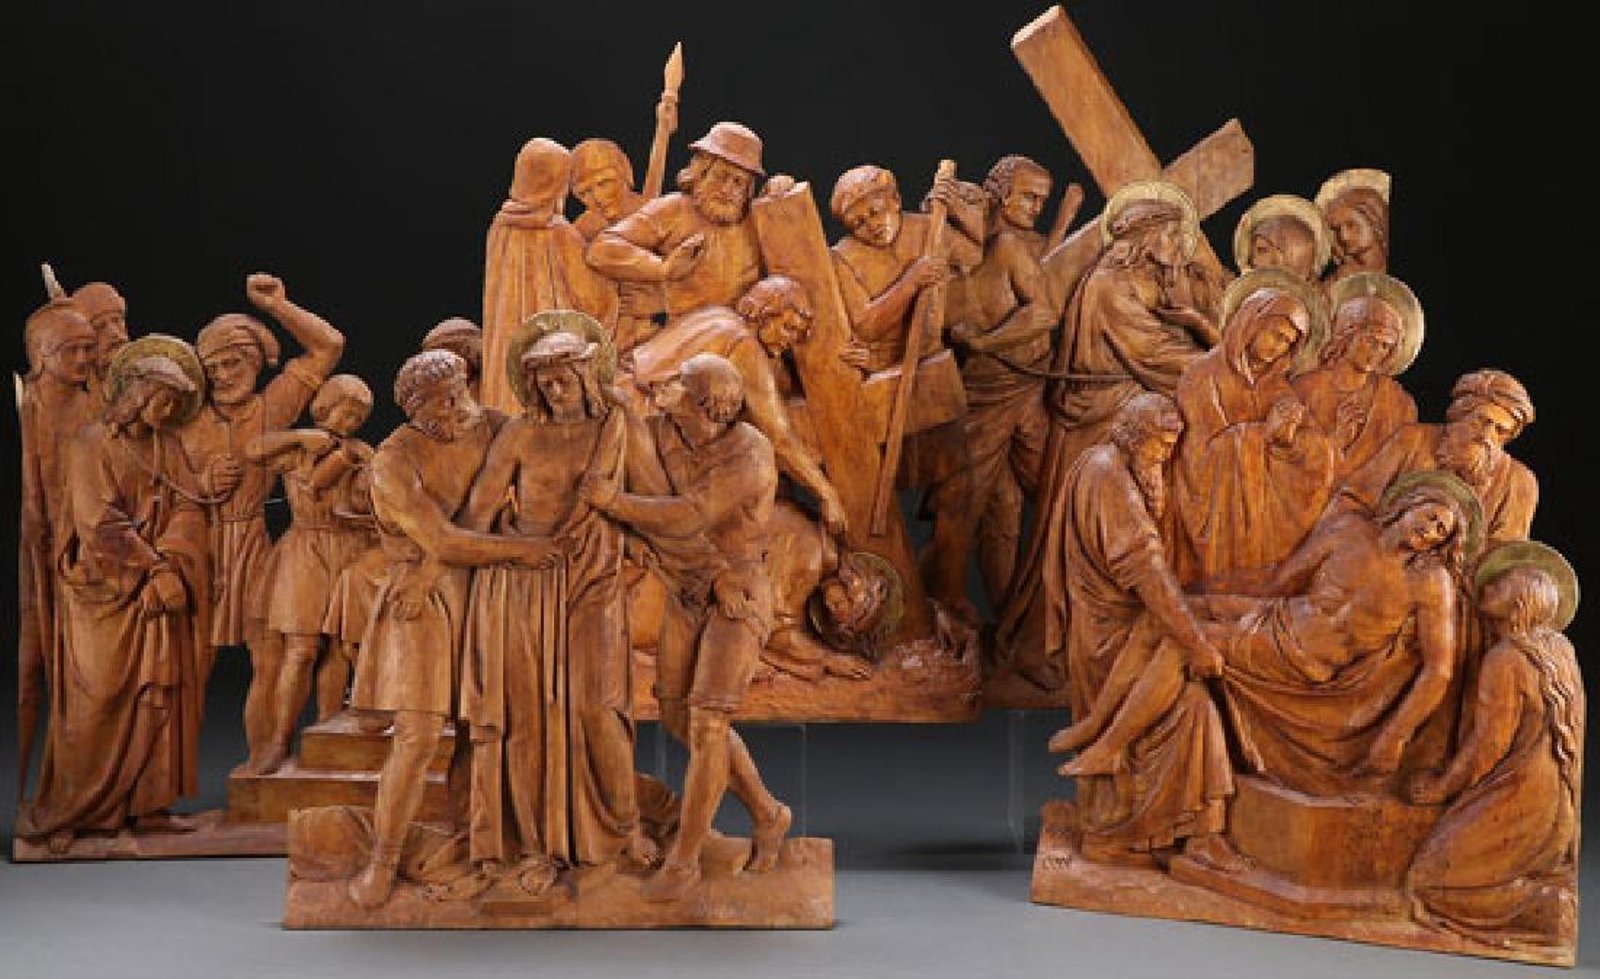 AN IMPRESSIVE GROUP OF FIVE RELIEF CARVED WOOD PANELS OF THE PASSION, GERMAN, 19TH CENTURY